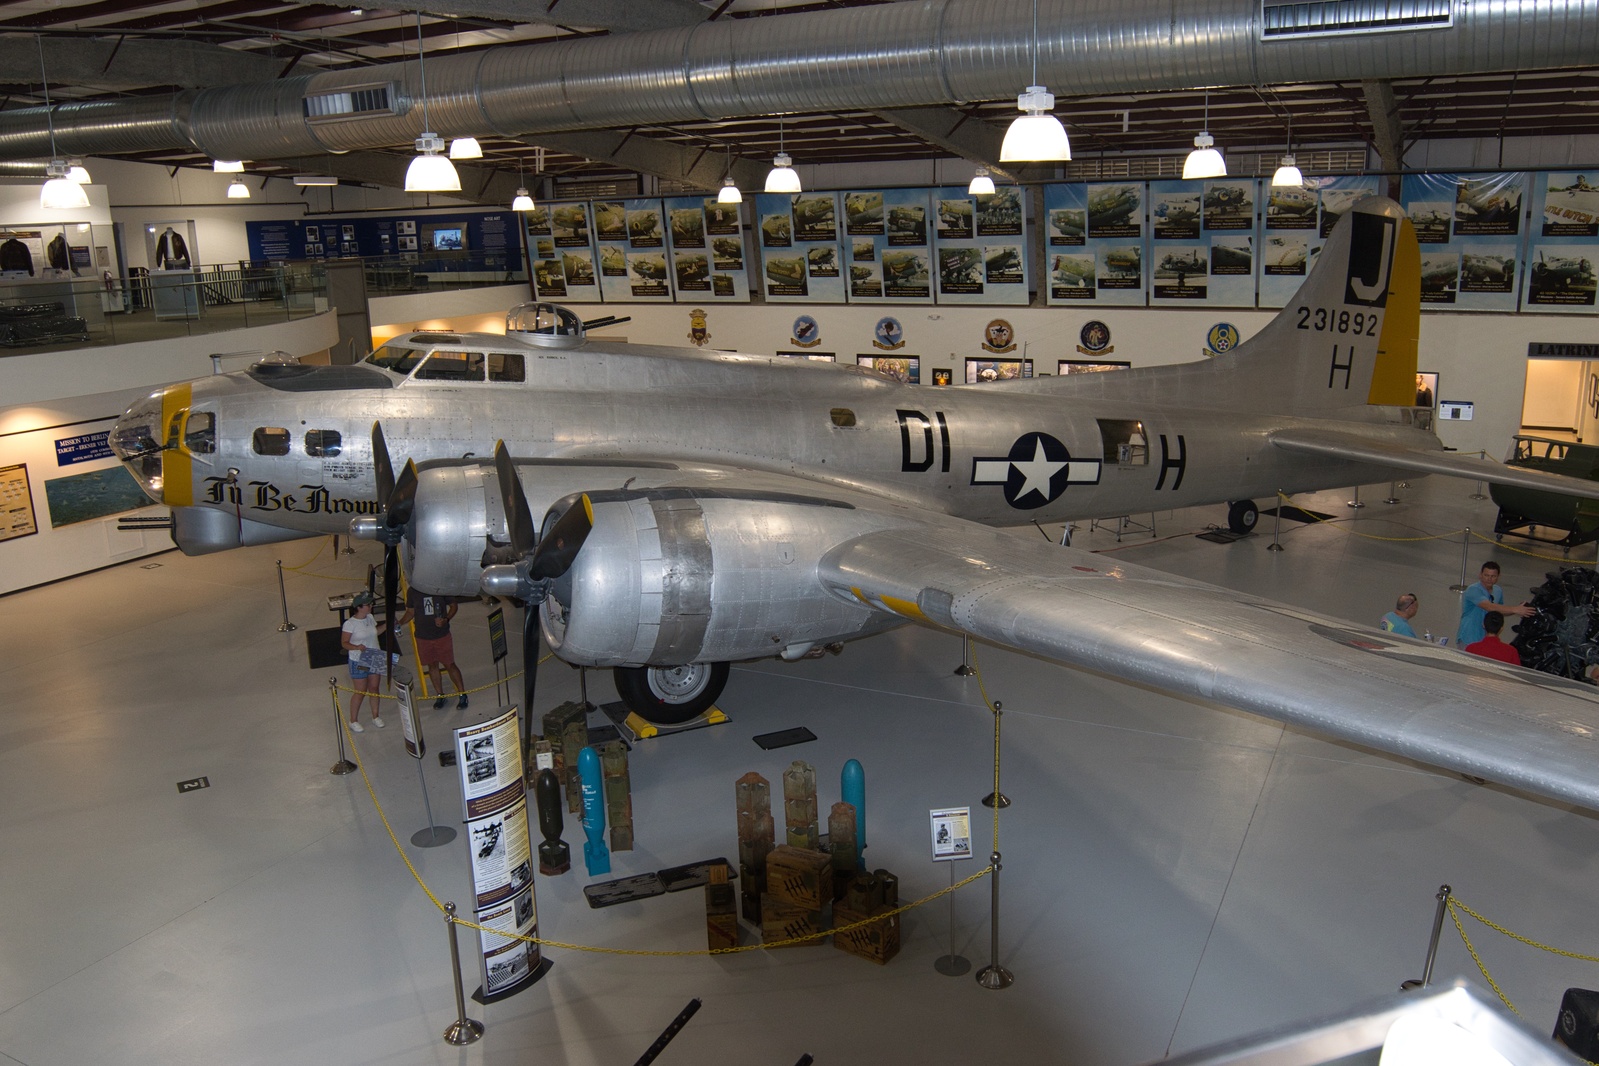 Image of Pima Air Museum by Steve West